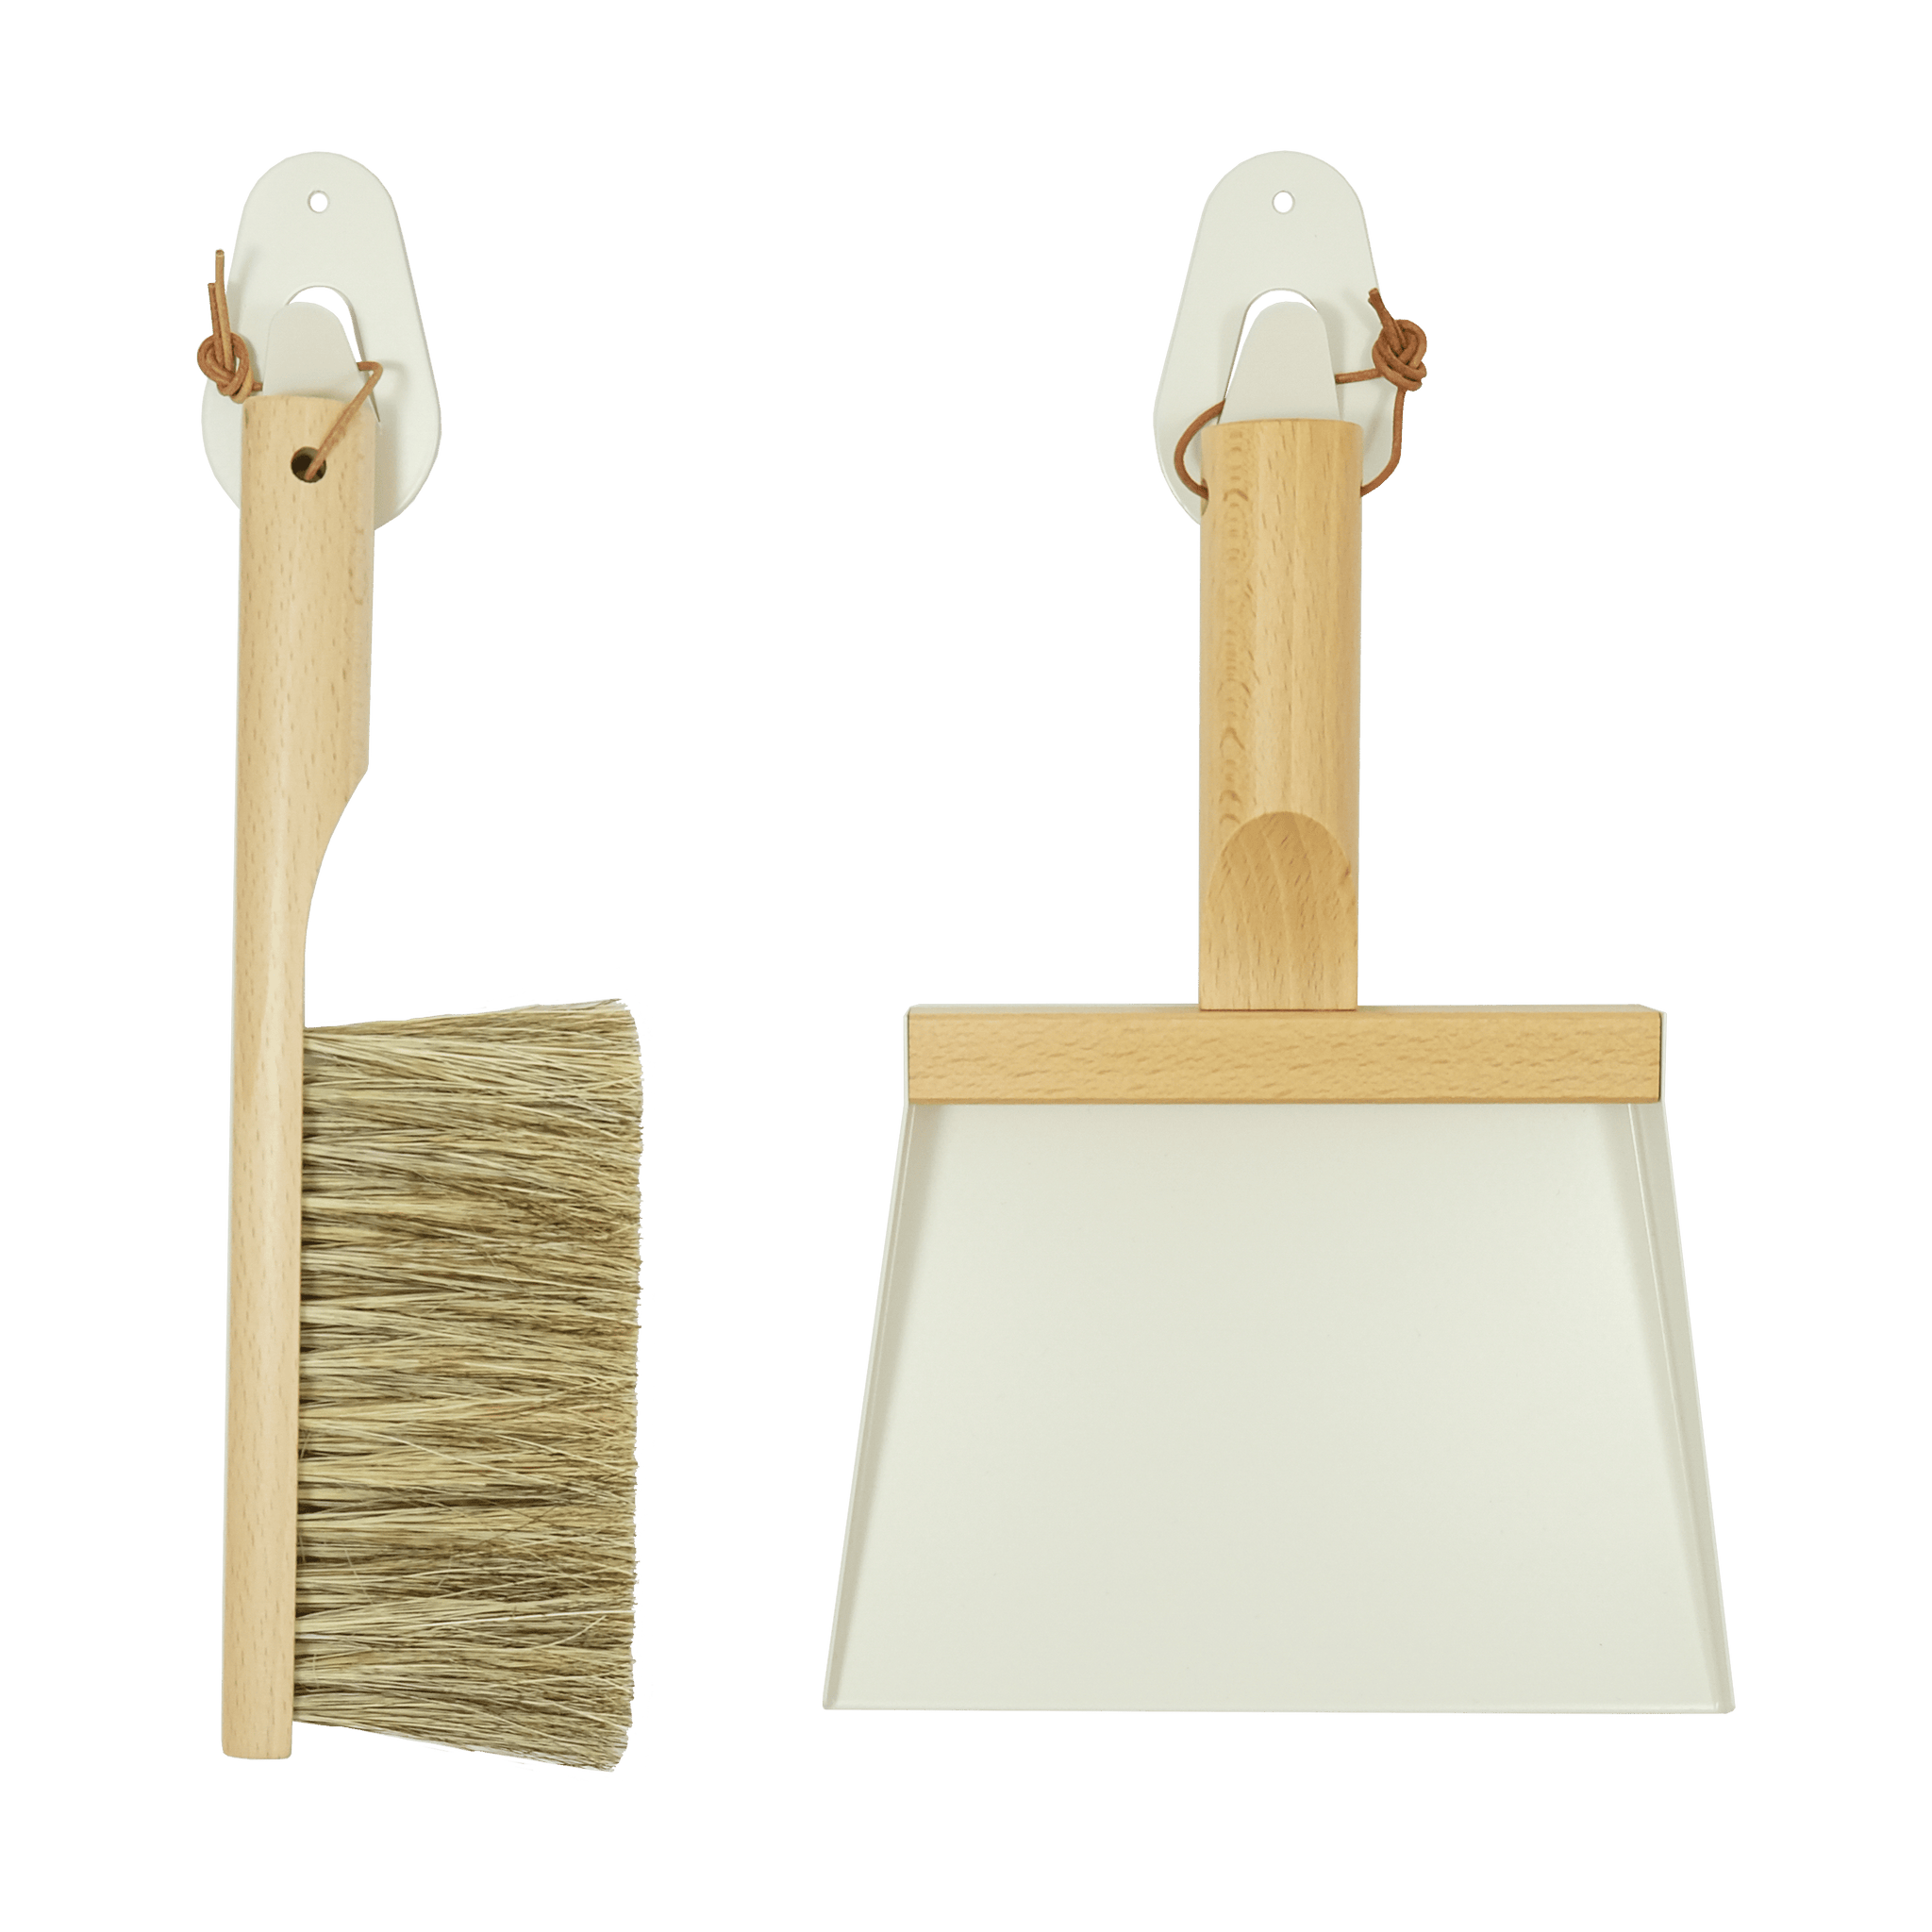 Andrée Jardin Mr. and Mrs. Clynk Cream Dustpan & Brush "Coffret" Gift Set with Two Wall Hooks—Natural Bristles